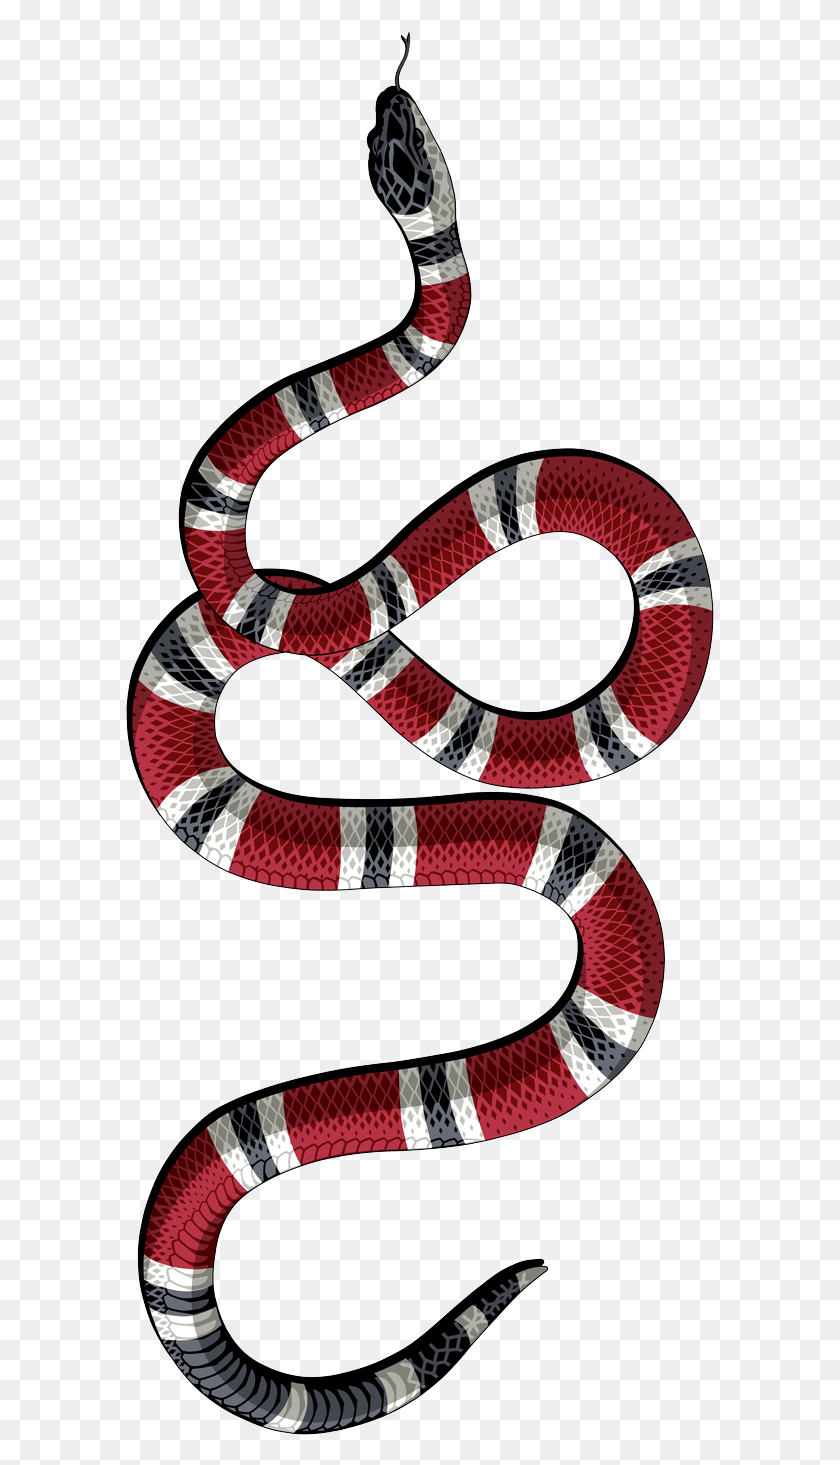 589x1405 Descargar Png Image Result For Gucci Snake Http Funda Gucci Iphone Xs, King Snake, Reptil, Animal Hd Png